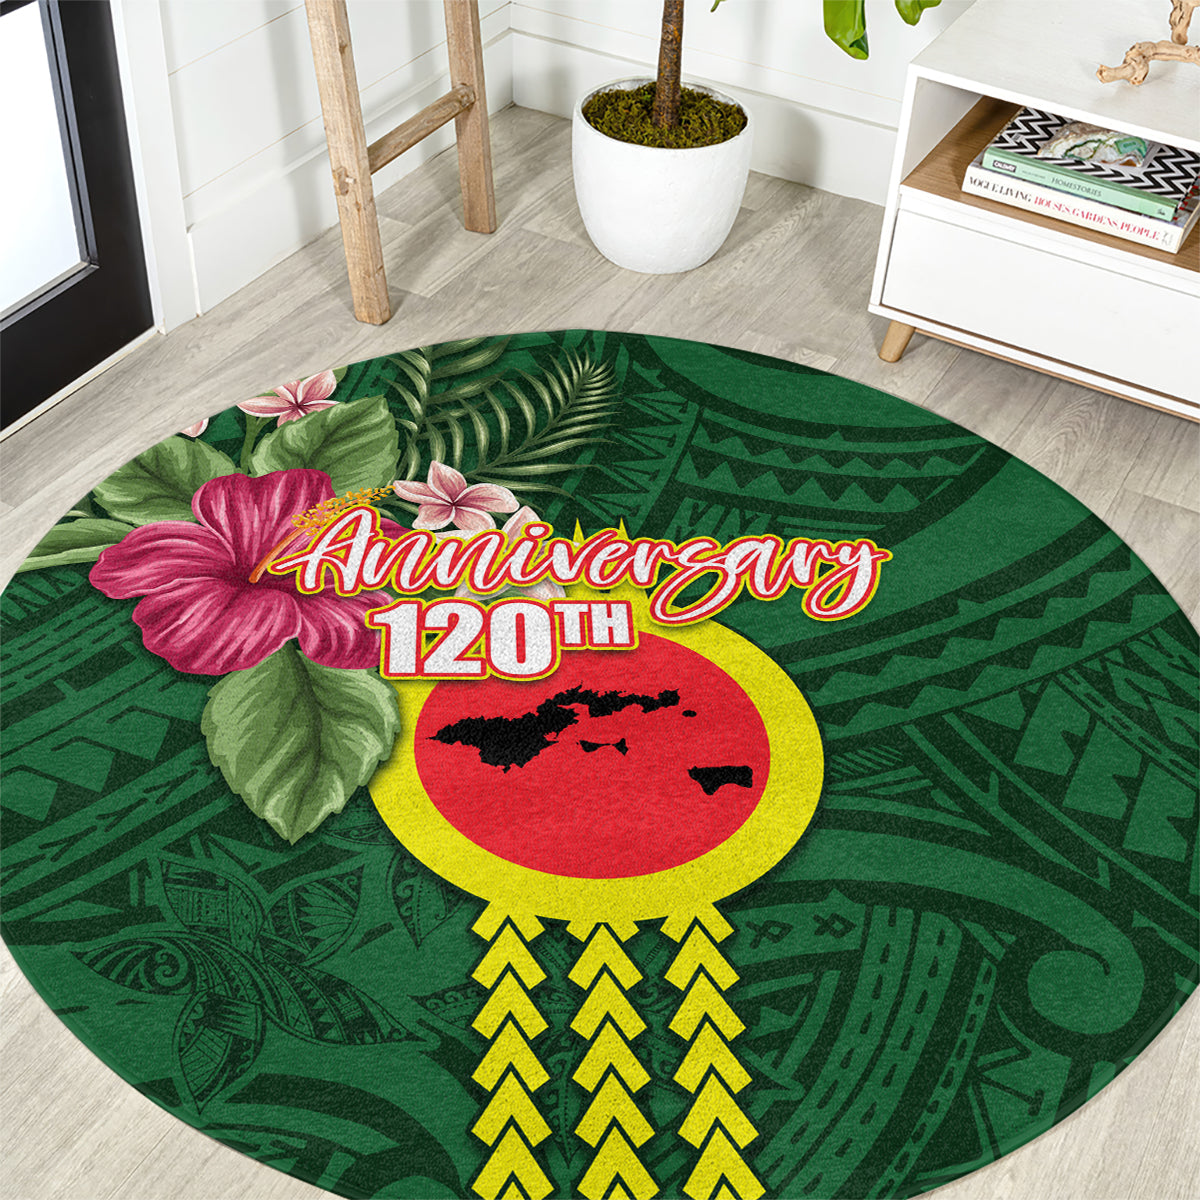 Manu'a Cession Day 120th Anniversary Round Carpet Polynesian Pattern and Hibiscus Flower